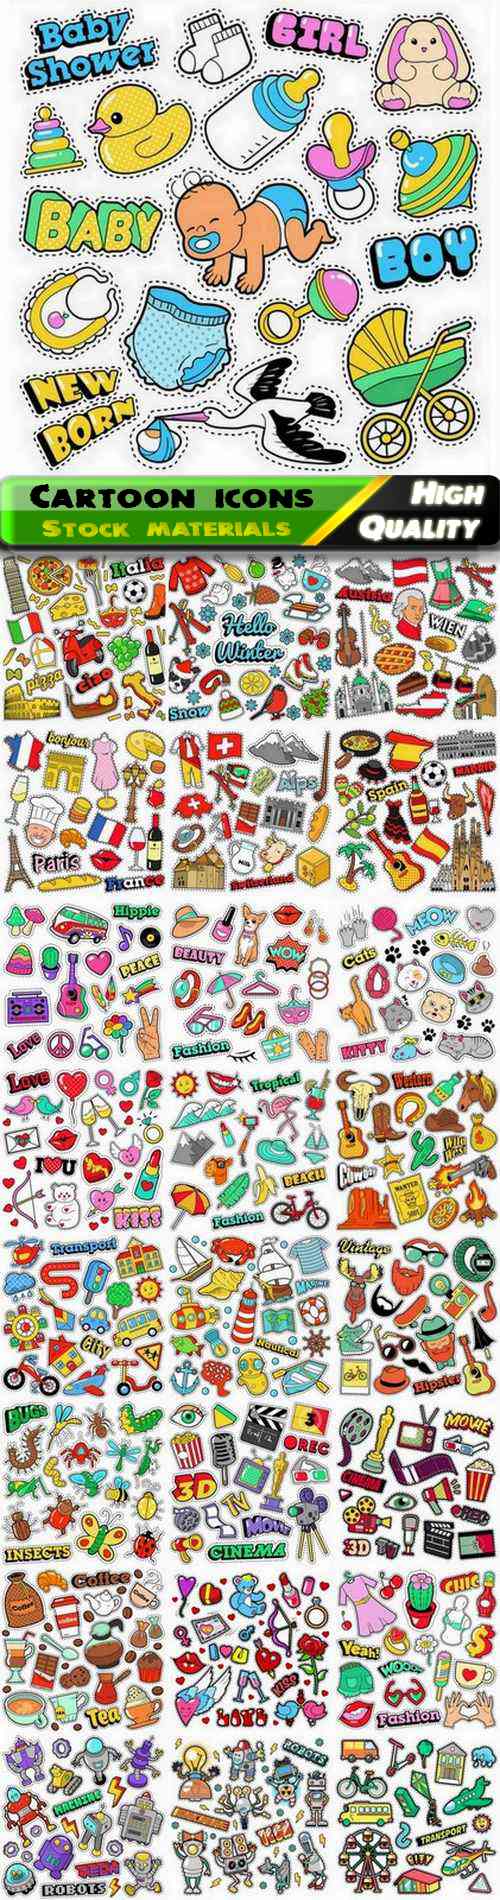 Set of different cartoon icons and objects illustration 25 Eps